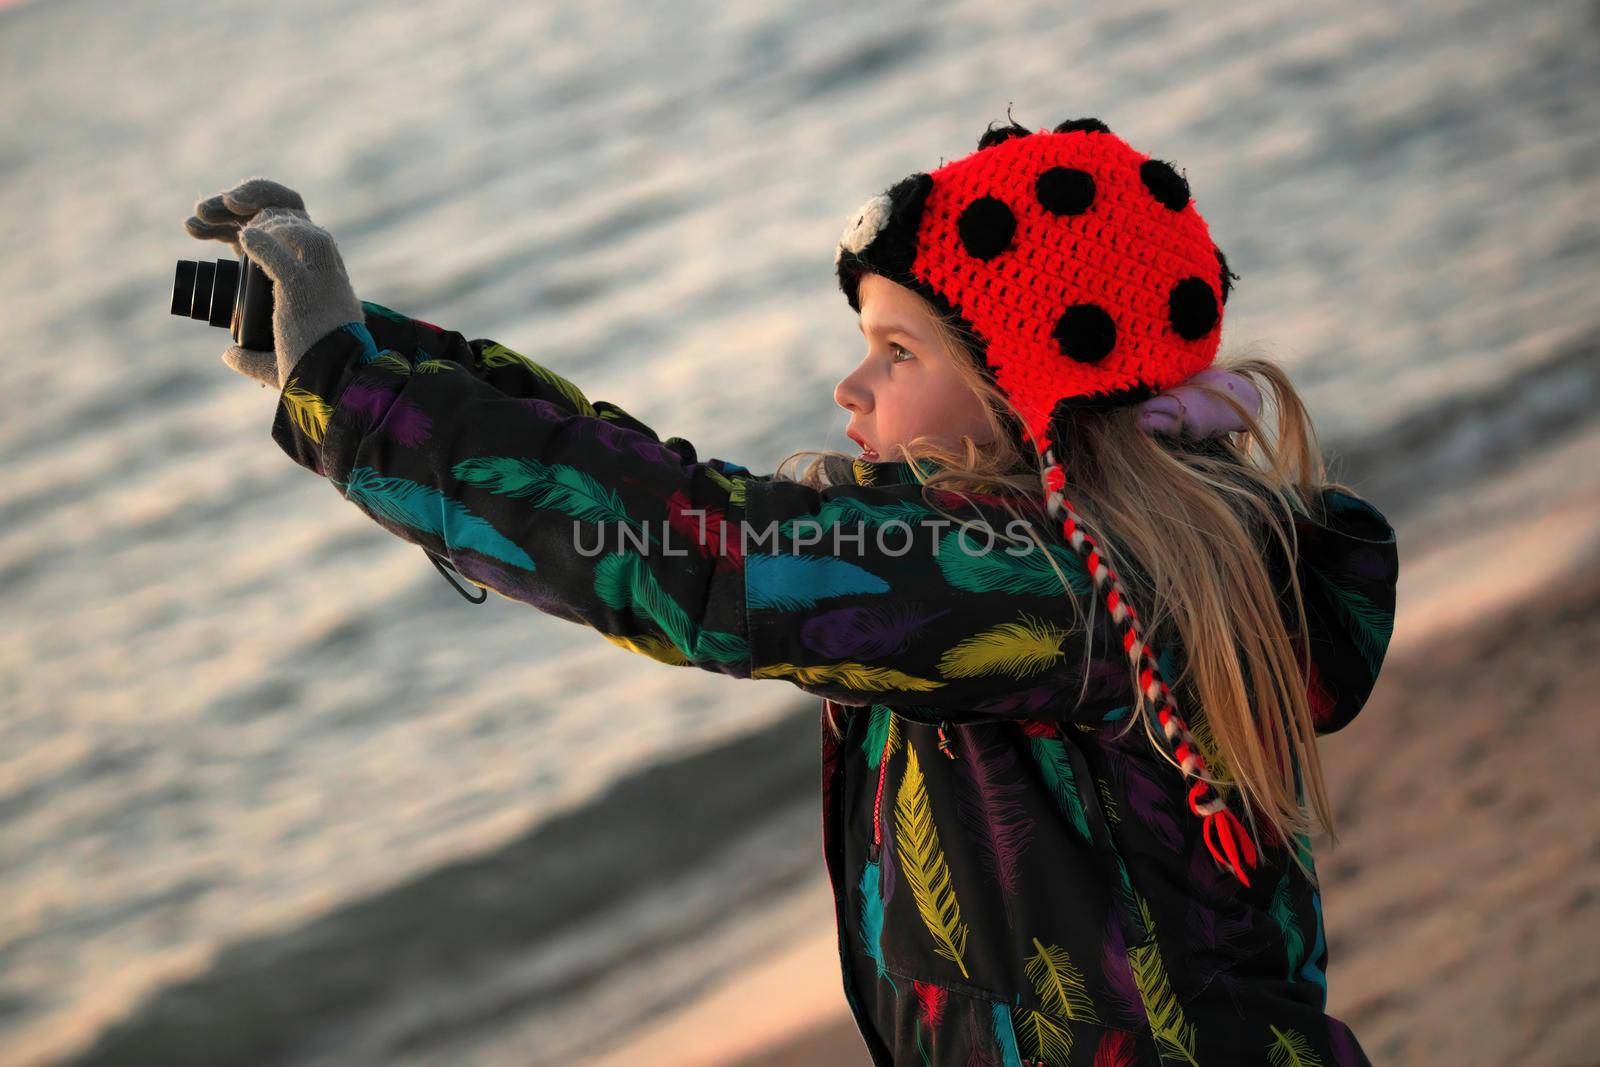 A 9 year old girls takes pictures with a camera at the beach at sunset. by markvandam